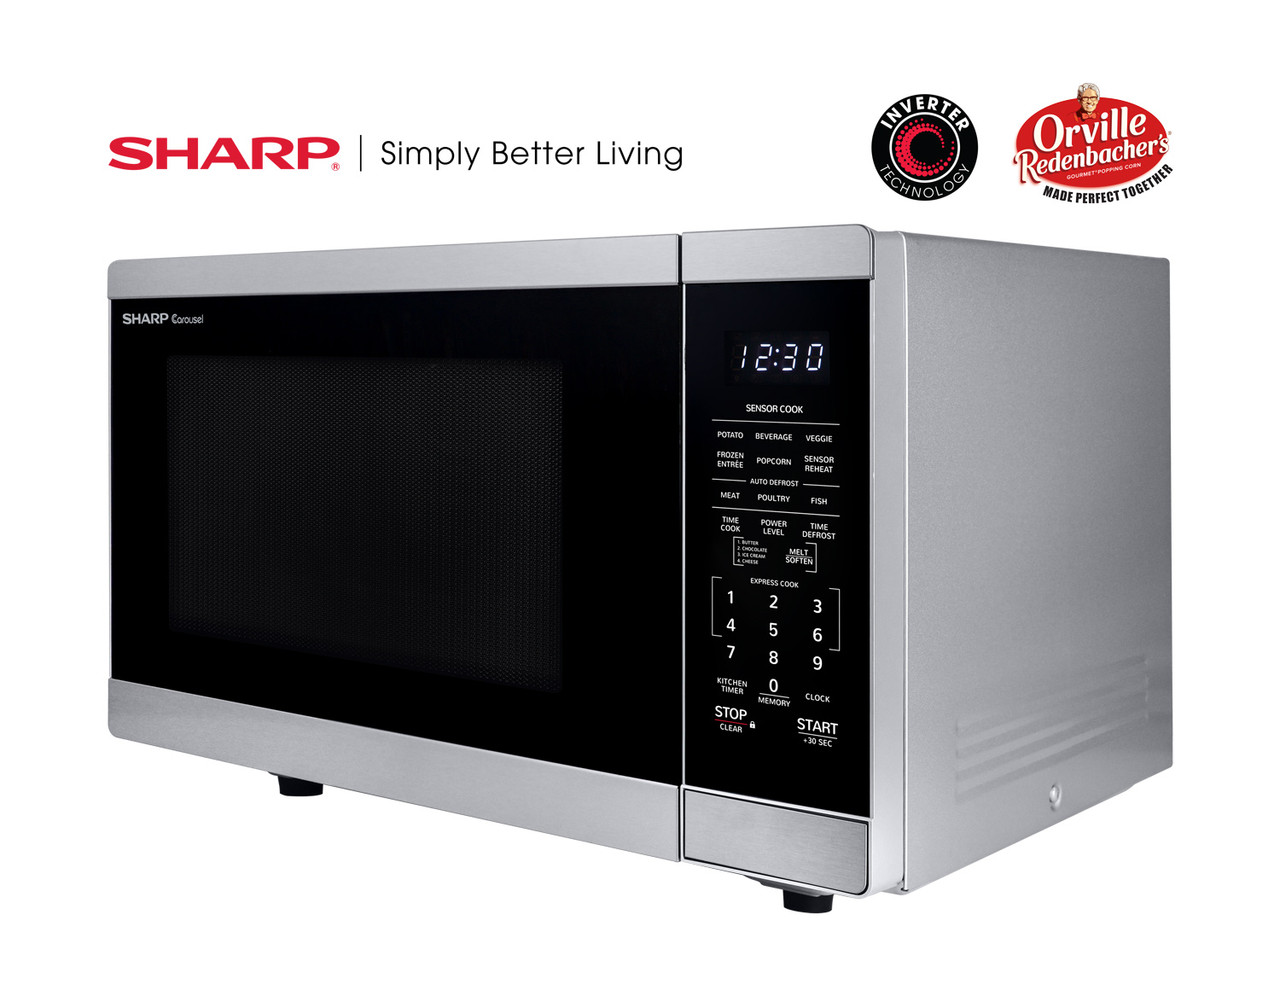 1.4 cu. ft. Countertop Microwave Oven with Inverter Technology (SMC1465HM) drama